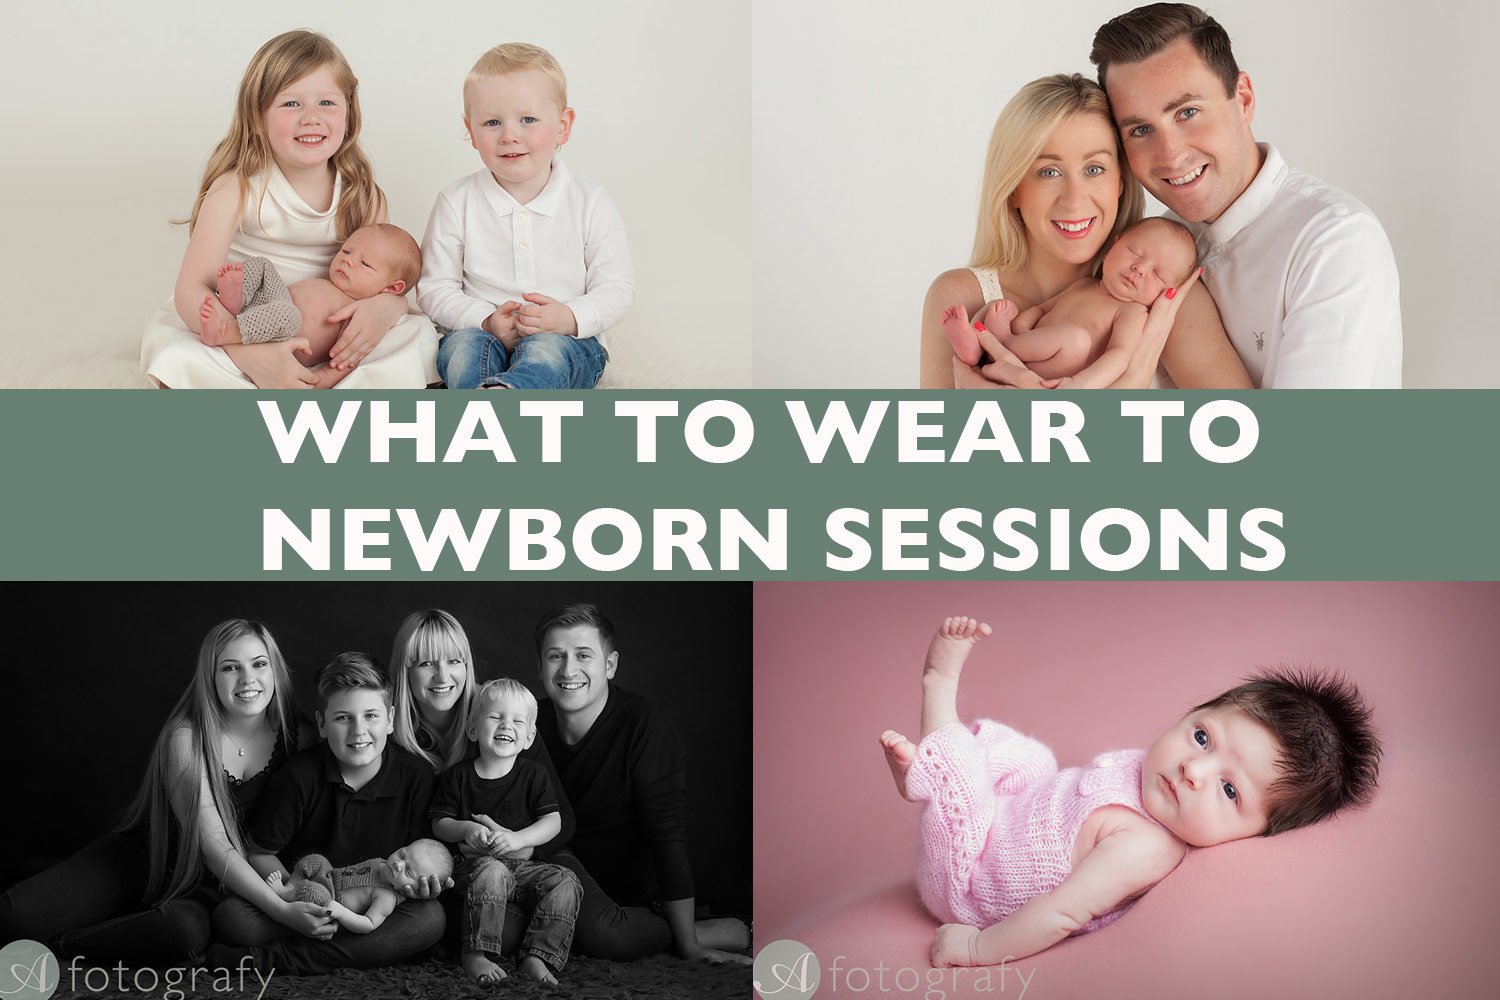 What To Wear For Newborn Photo Session Guide For Parents